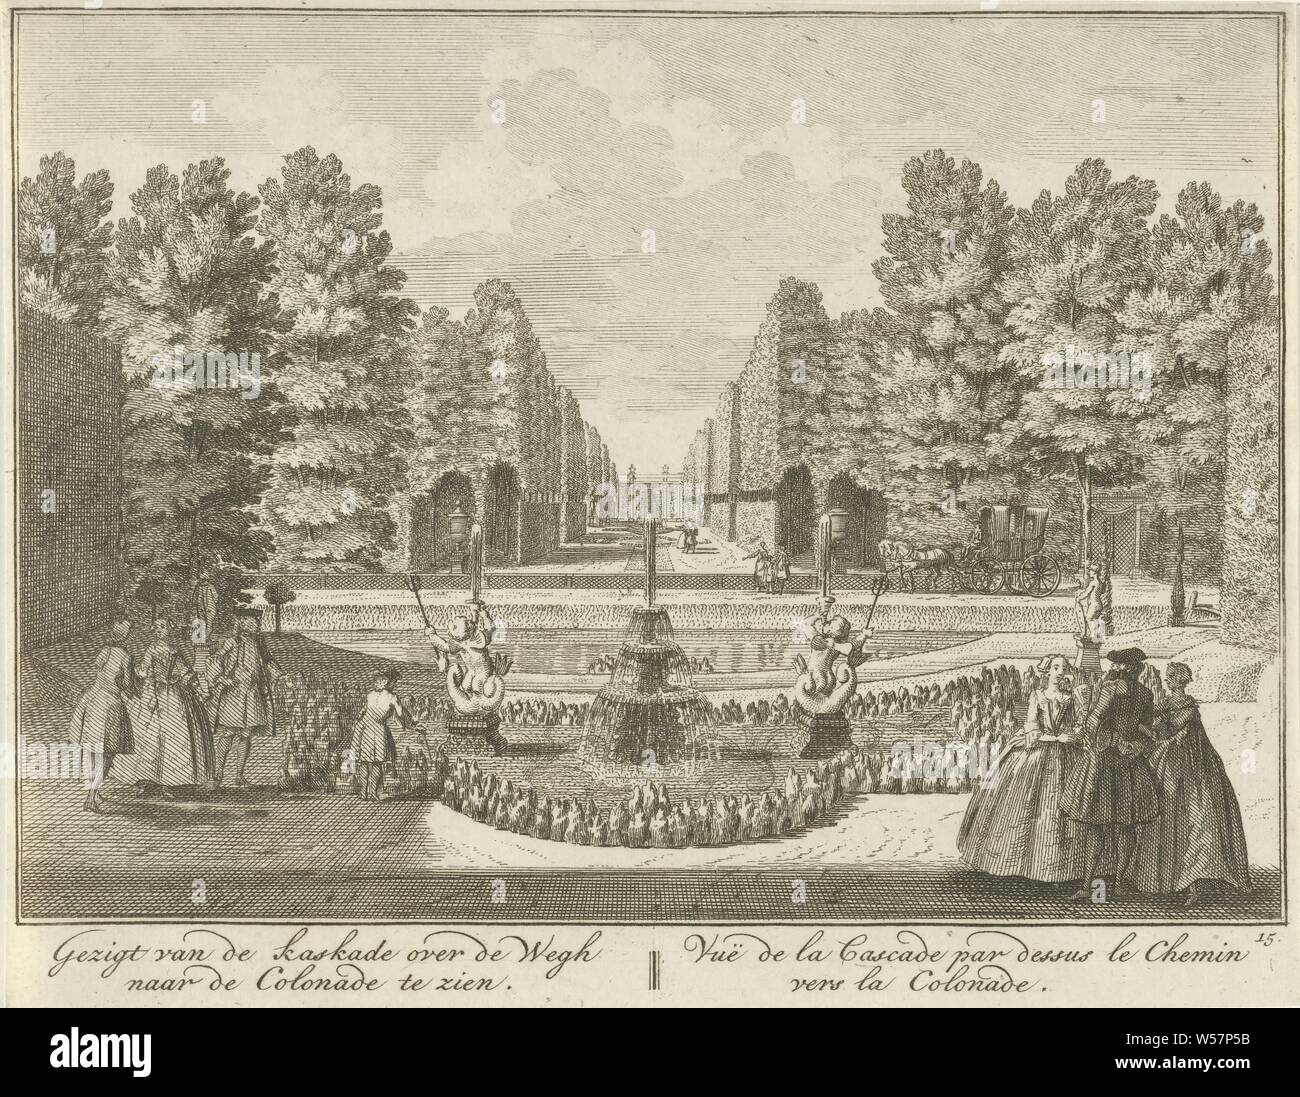 View of the pond towards the colonnade in the garden of Huis ter Meer in Maarssen View from the cascade over the Wegh to the Colonade / Vue de la Cascade par dessus le Chemin vers la Colonade (title on object) The Oud Adelyk huys and Ridderhofstad Ter Meer (series title), View of the pond towards the colonnade in the French garden of Huis ter Meer. In the foreground are two groups of conversational figures. The print is part of a series with 26 faces on Huis ter Meer and the accompanying estate in Maarssen, country house, French or architectonic garden, formal garden, garden fountain, Huis Ter Stock Photo